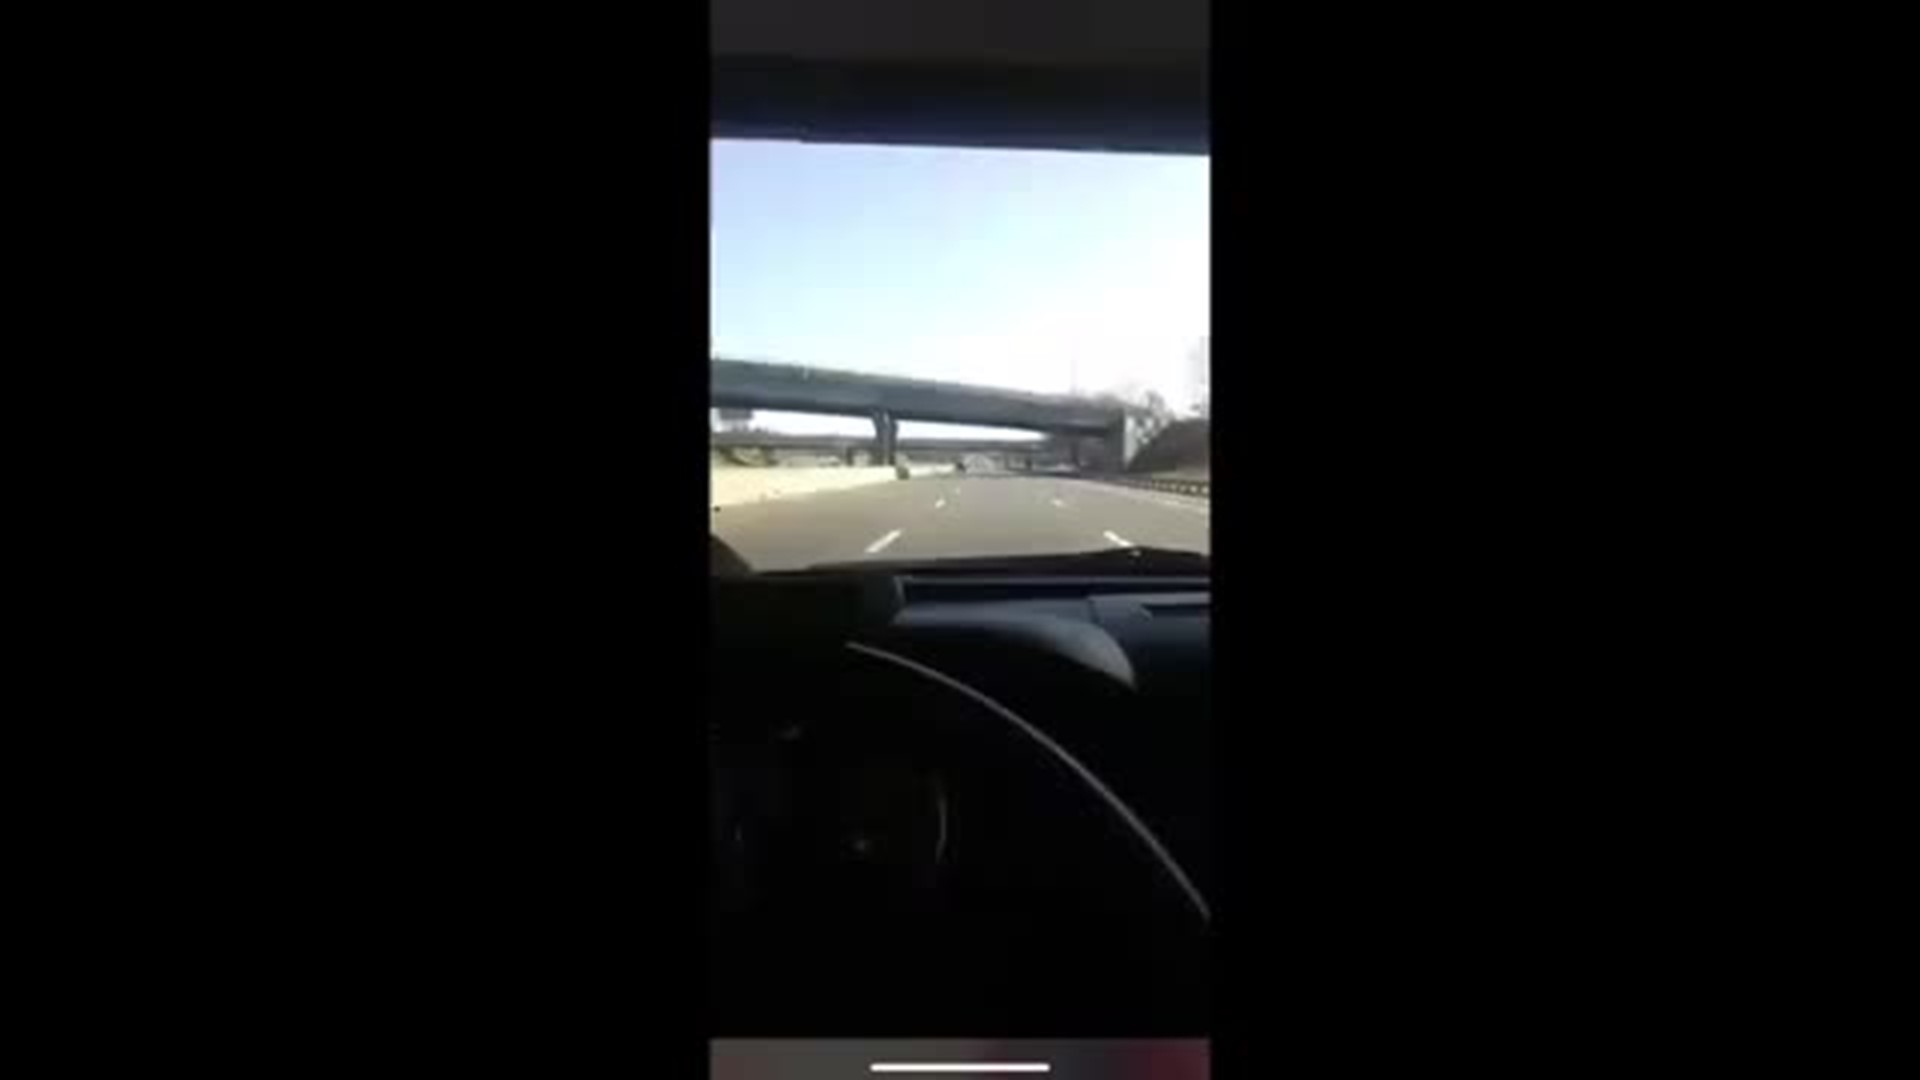 Driver speeds, then crashes after going over Gold Star Bridge all on livestream